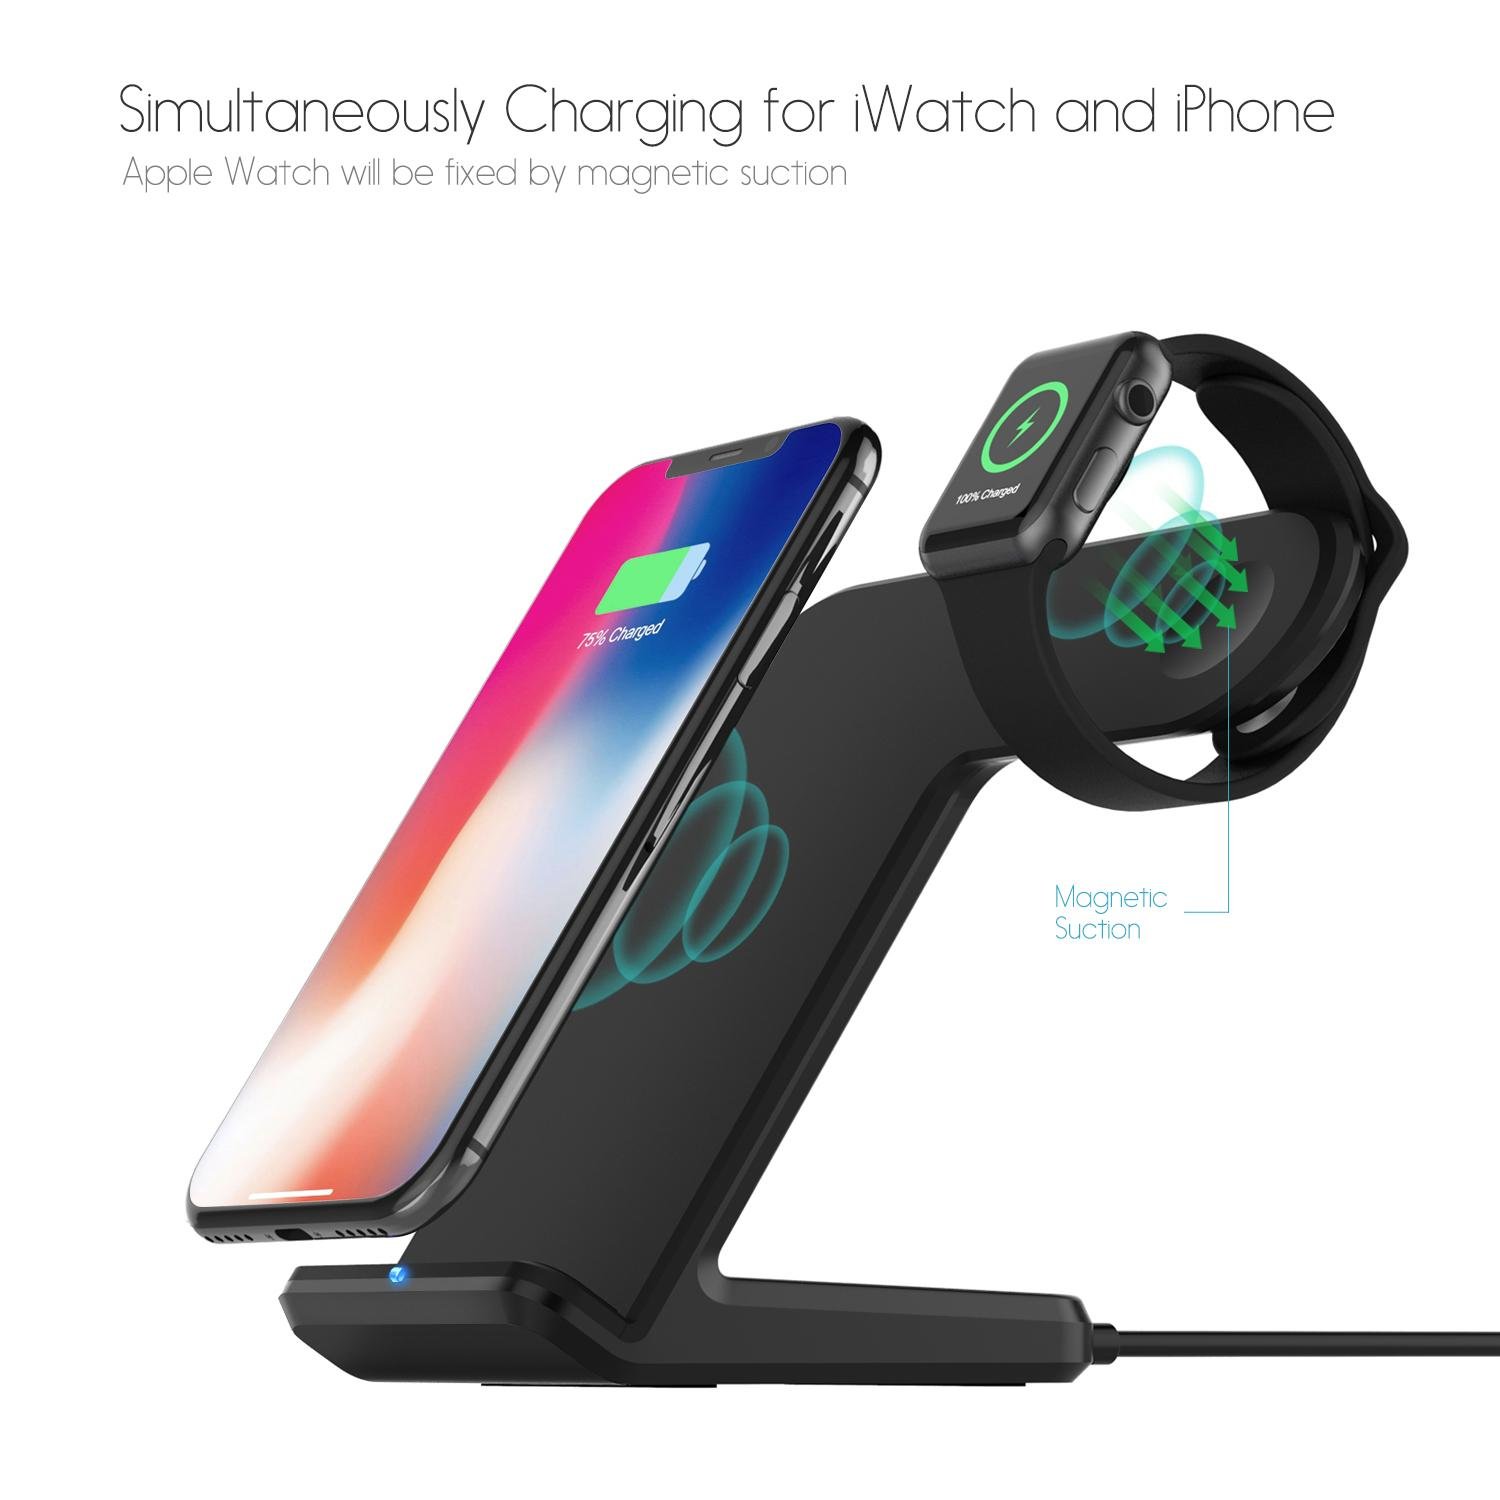 2 in 1 Qi Wireless Fast Charger Dock Station Stand For Watch/Phone Samsung S9 S8